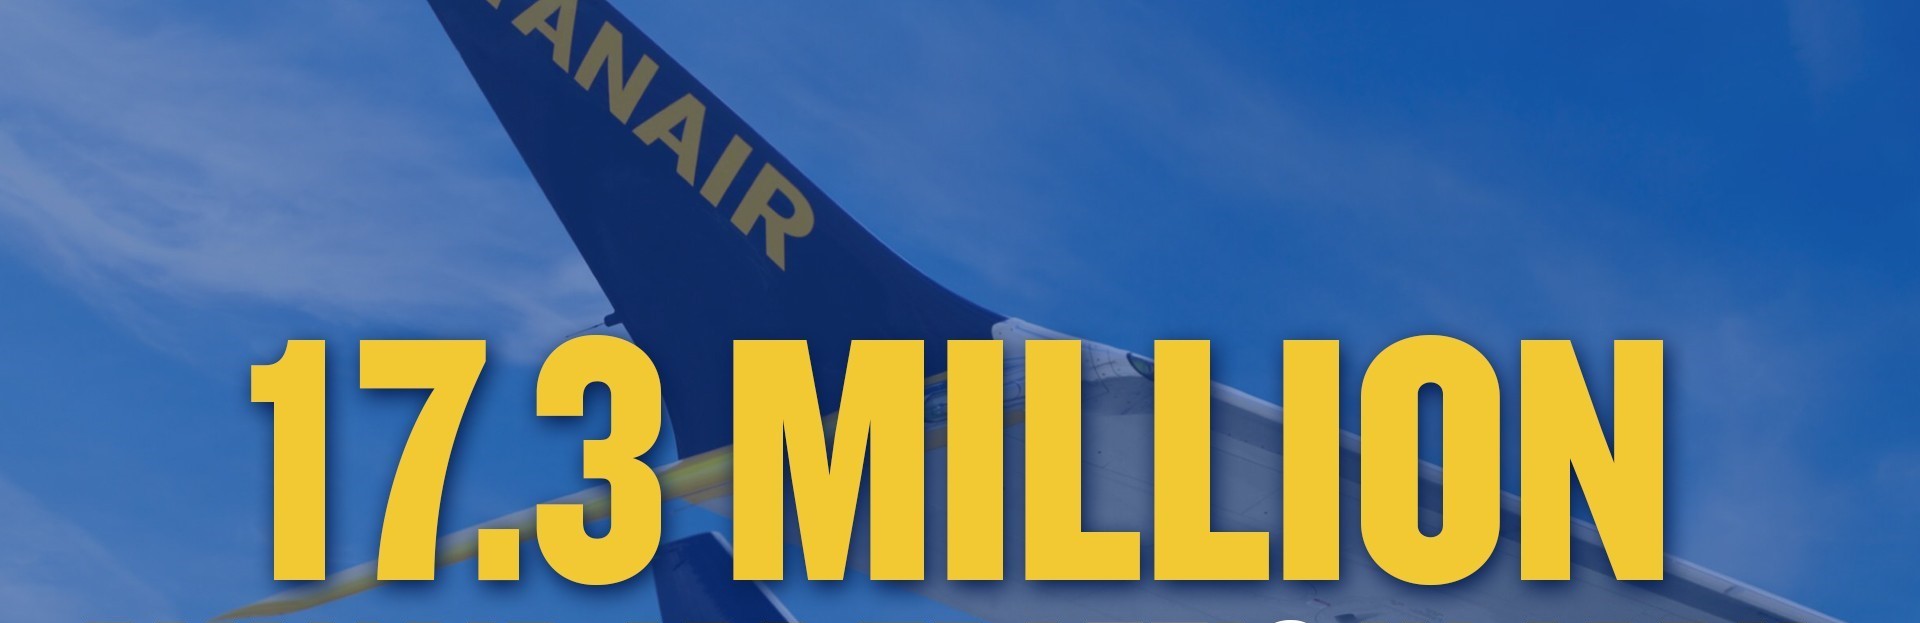 RYANAIR APR TRAFFIC GROWS 8% TO 17.3M GUESTS